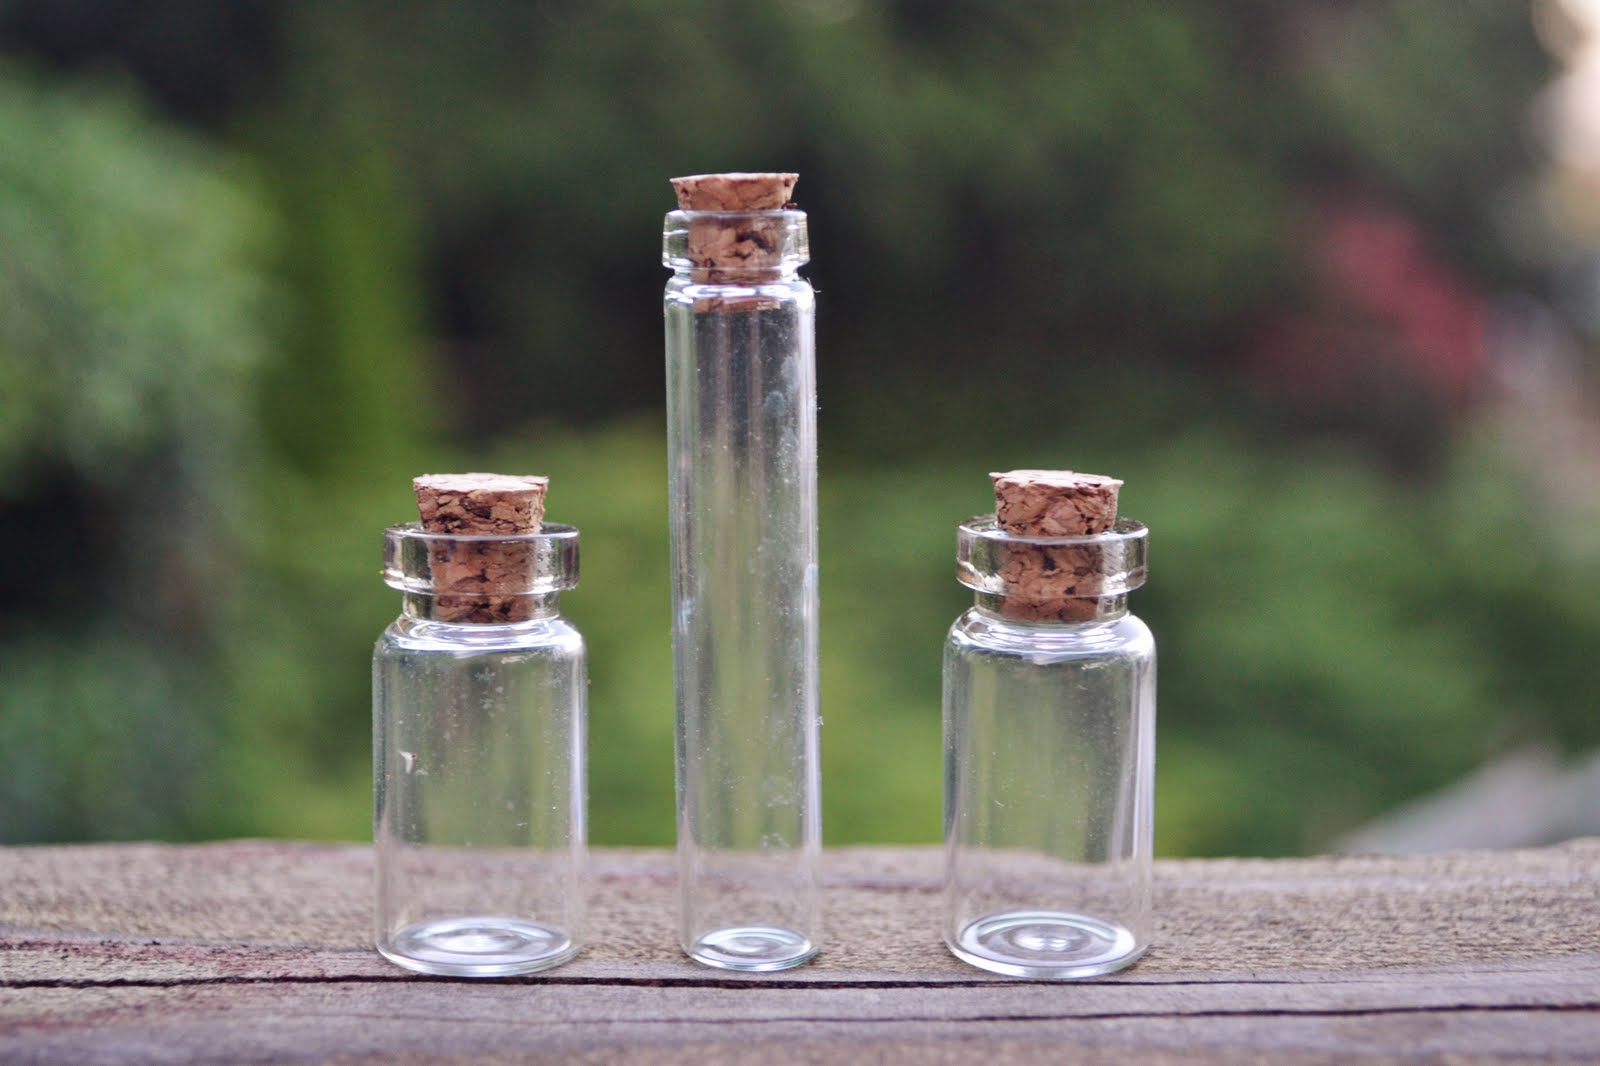 4 pack jewelry making bottles cork tiny bottle Short mini glass bottles 2 ml DIY mothers day crafts small vial apothecary bottle